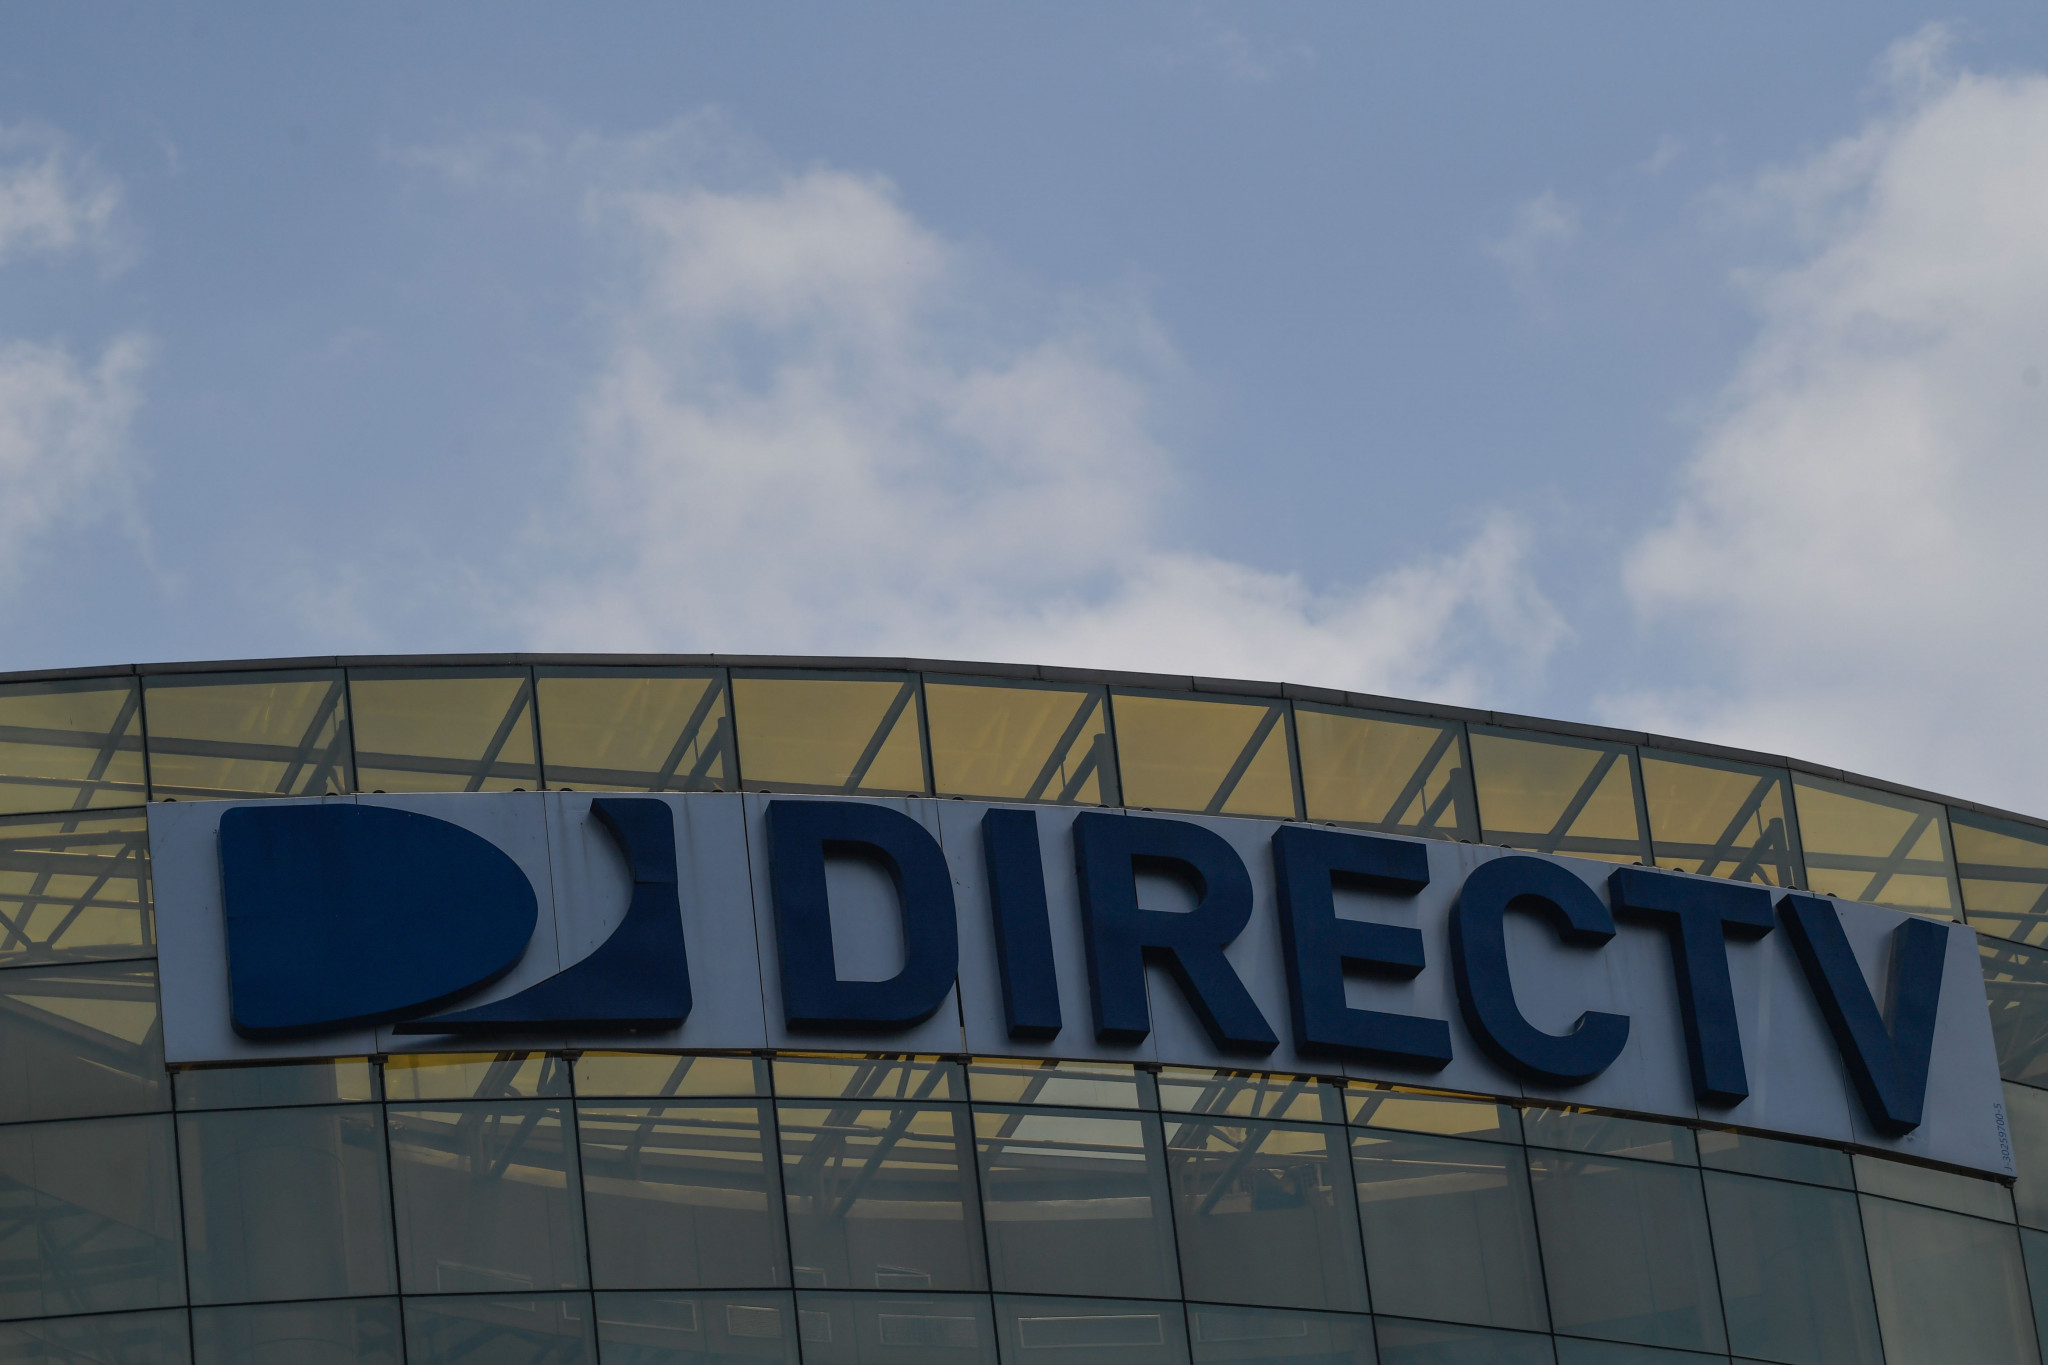 DirecTV becomes eighth company to secure Santiago 2023 broadcast rights